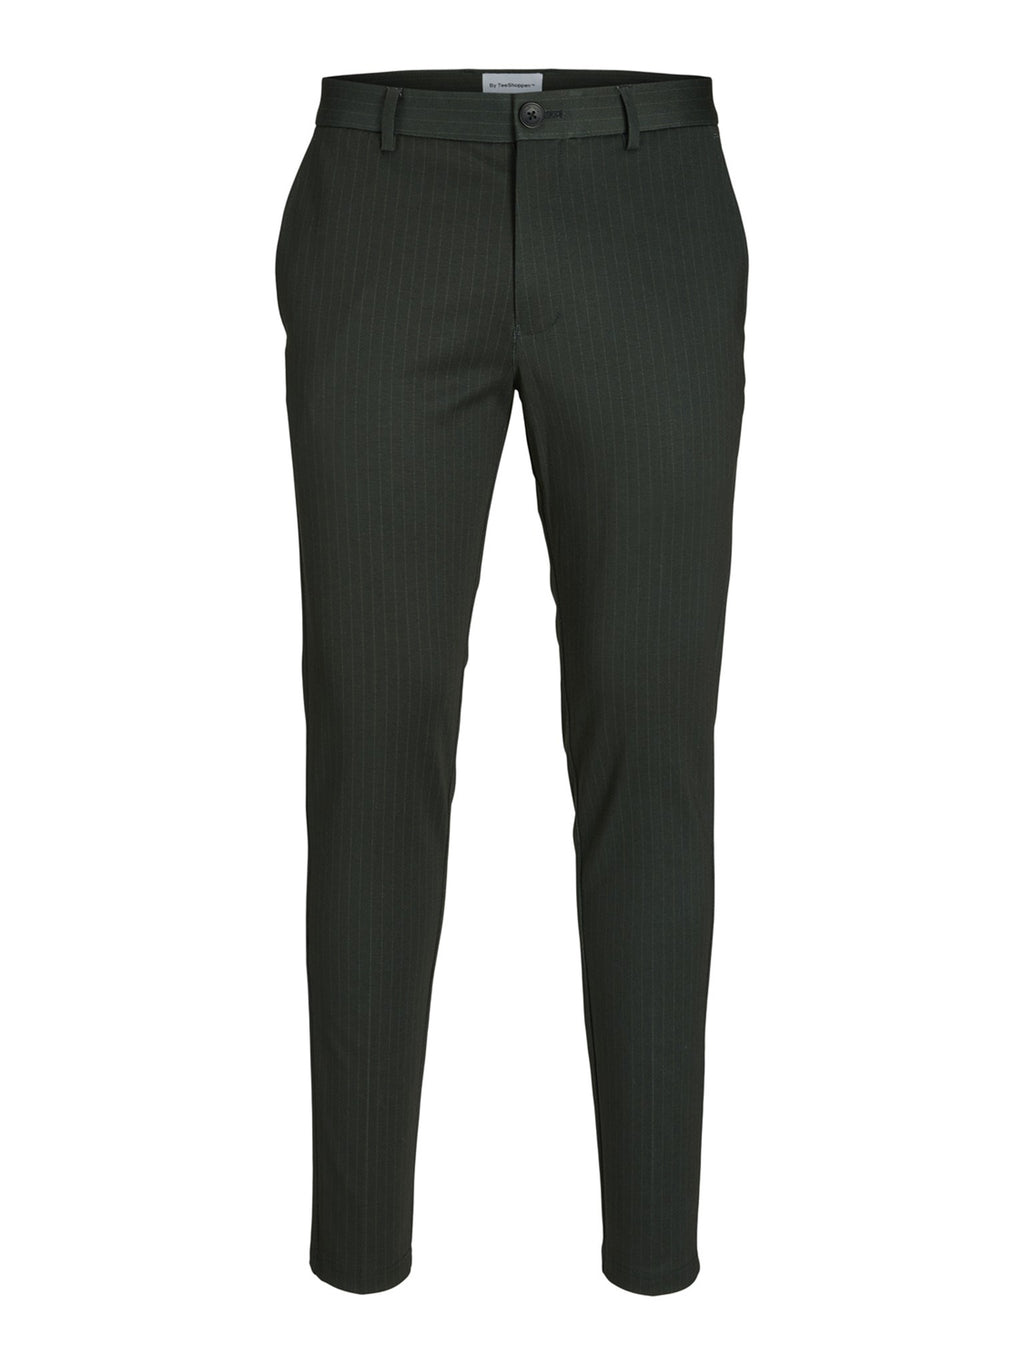 Performance Pants - Forest Night (Limited)